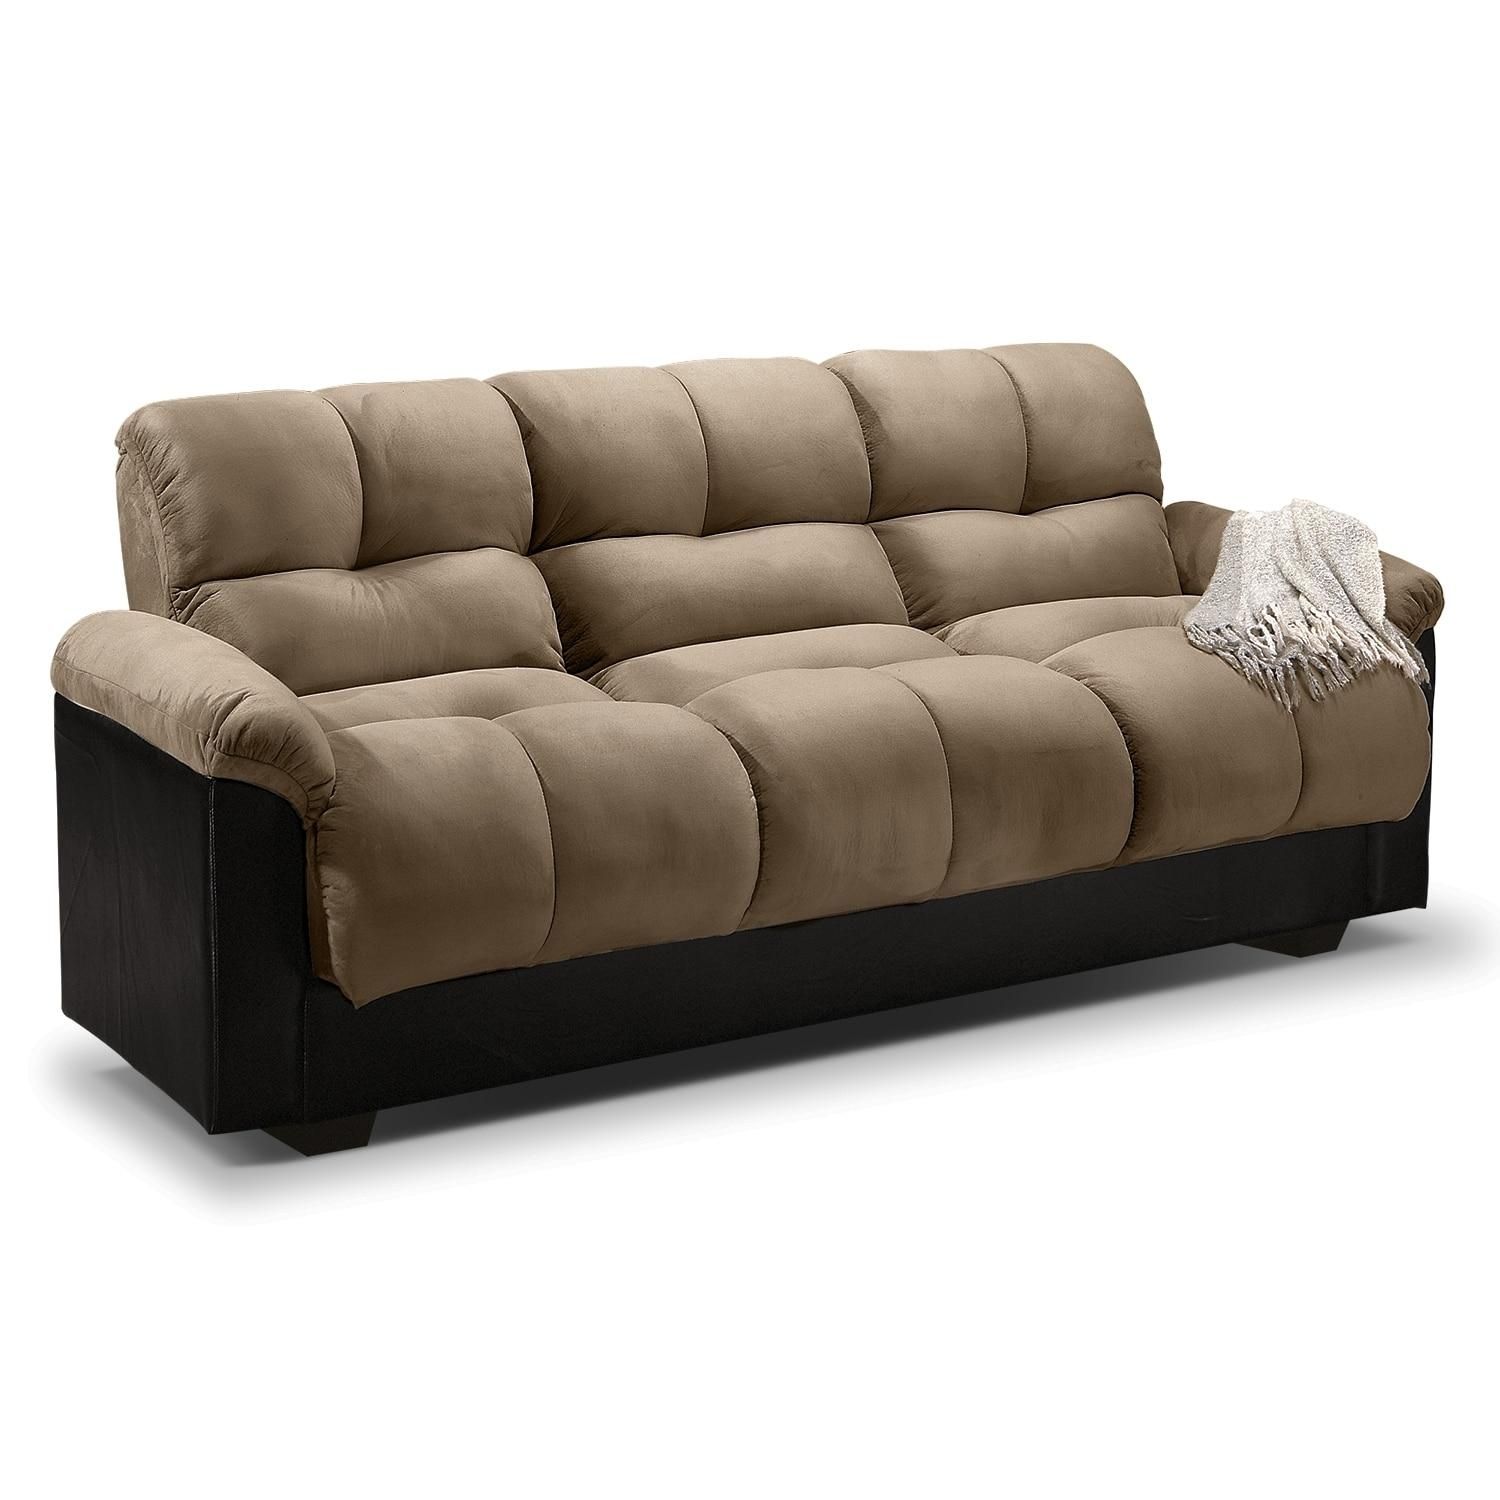 Futons | Living Room Seating | Value City Furniture Regarding Leather Sofa Beds With Storage (View 20 of 20)